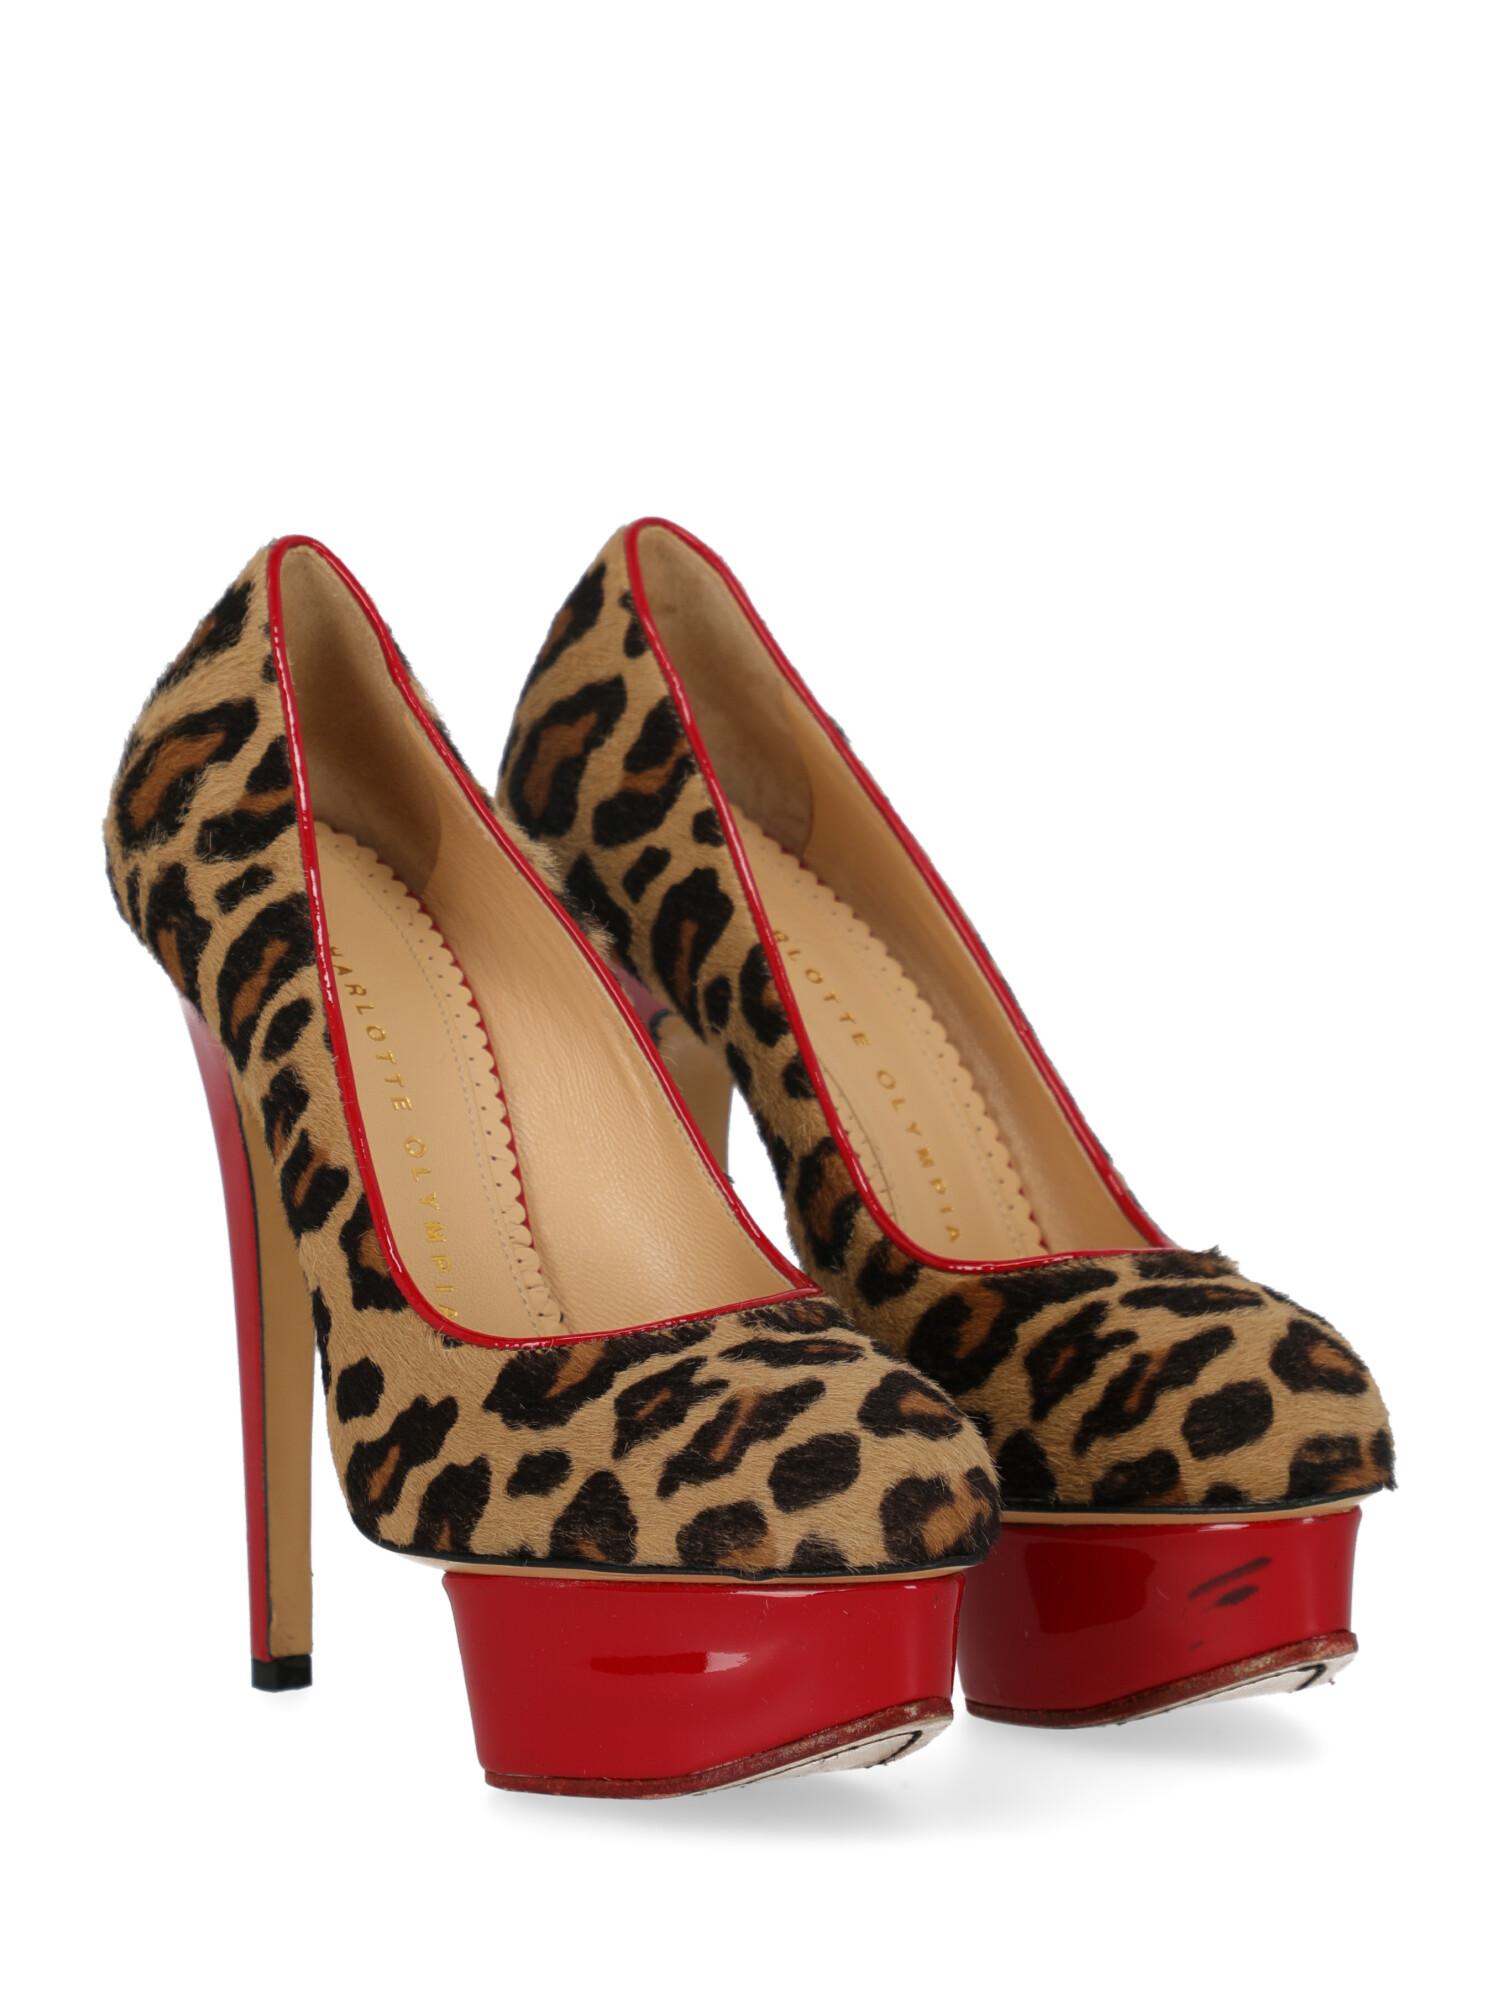 Shoe, leather, animal print, pony, branded insole, with plateau, high heel, leather lining, contrasting piping, patent trim

Includes: N/A

Product Condition: Good
Heel: visible stains. Sole: visible signs of use. Upper: negligible abrasions,